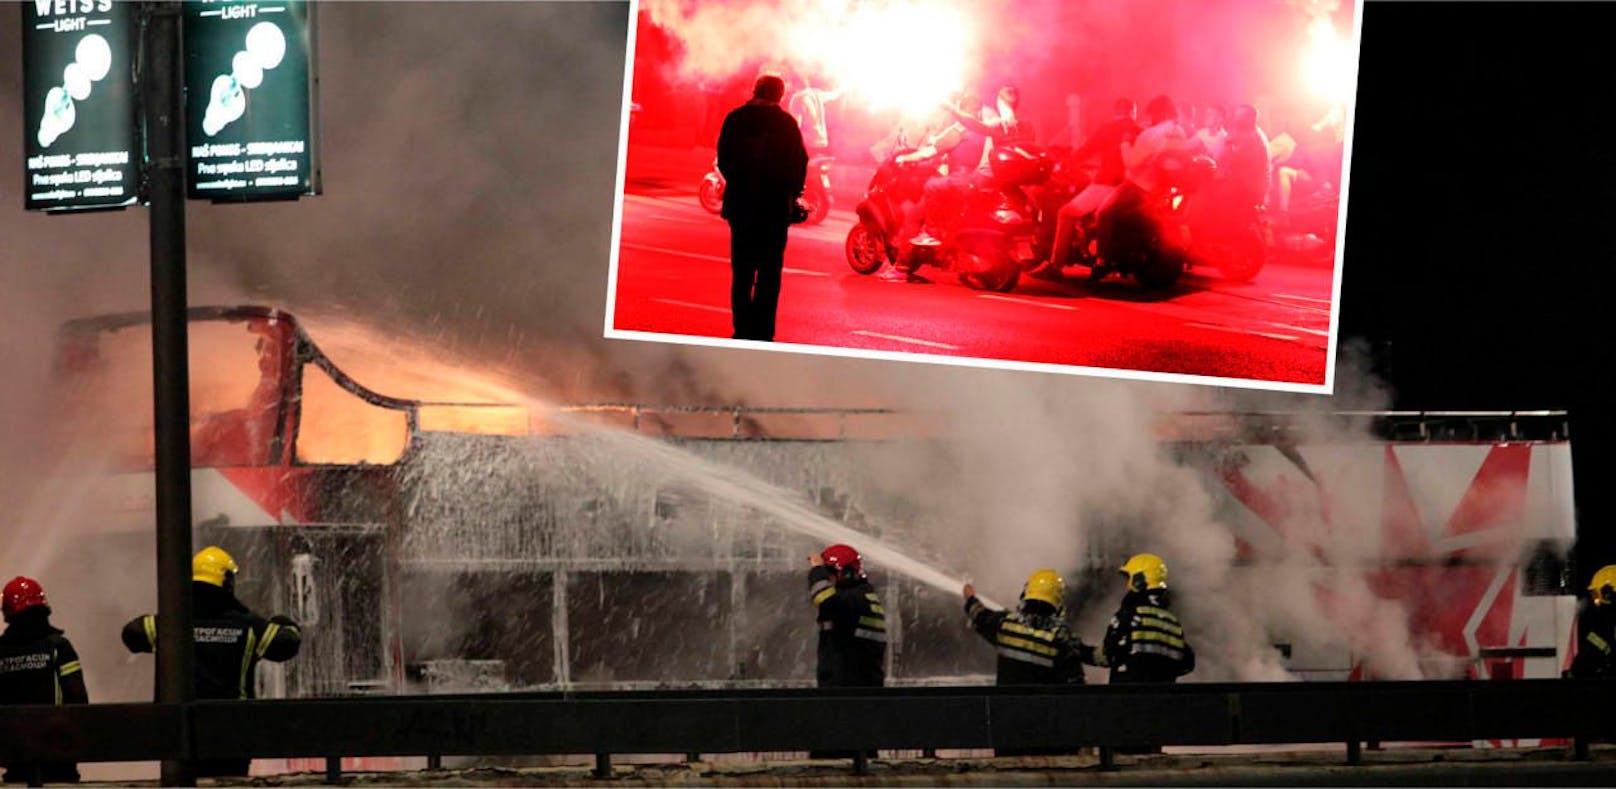 Pyro-Inferno! Roter-Stern-Fans fackeln Teambus ab